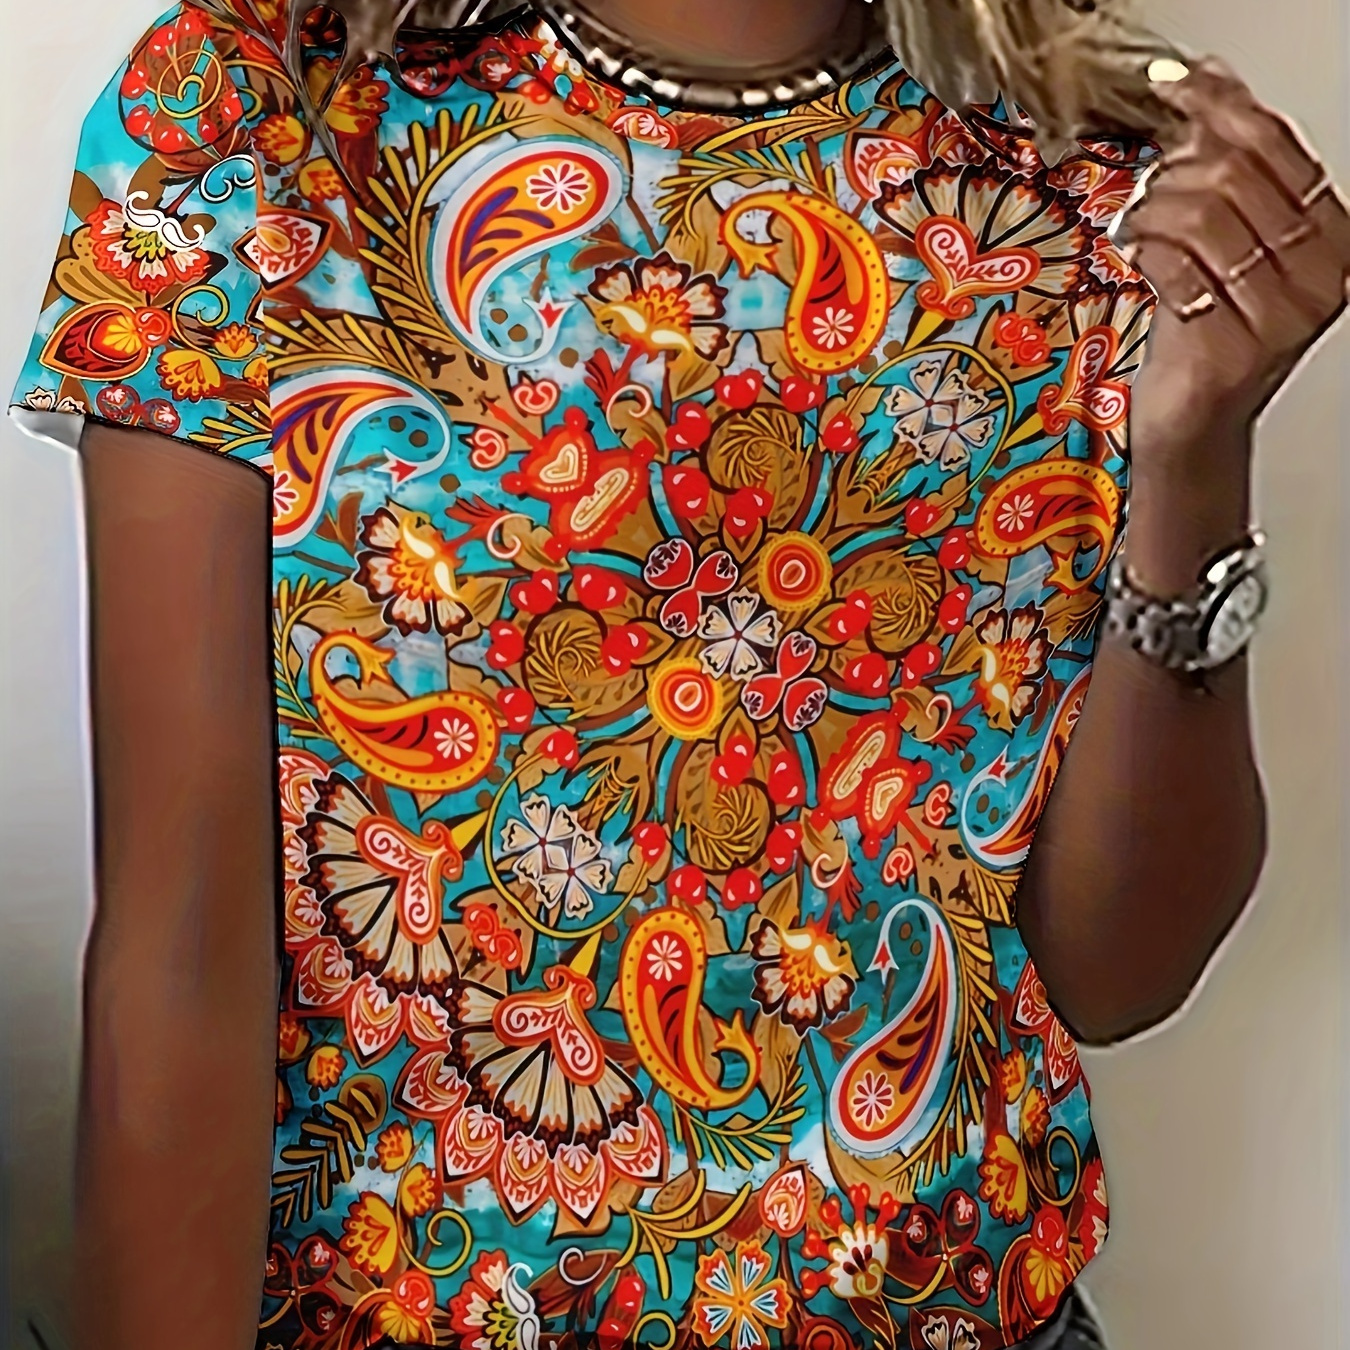 

Women's Printed T-shirt, Fashion Vintage Ethnic Paisley Cashew Floral Pattern, Short Sleeve Casual Top